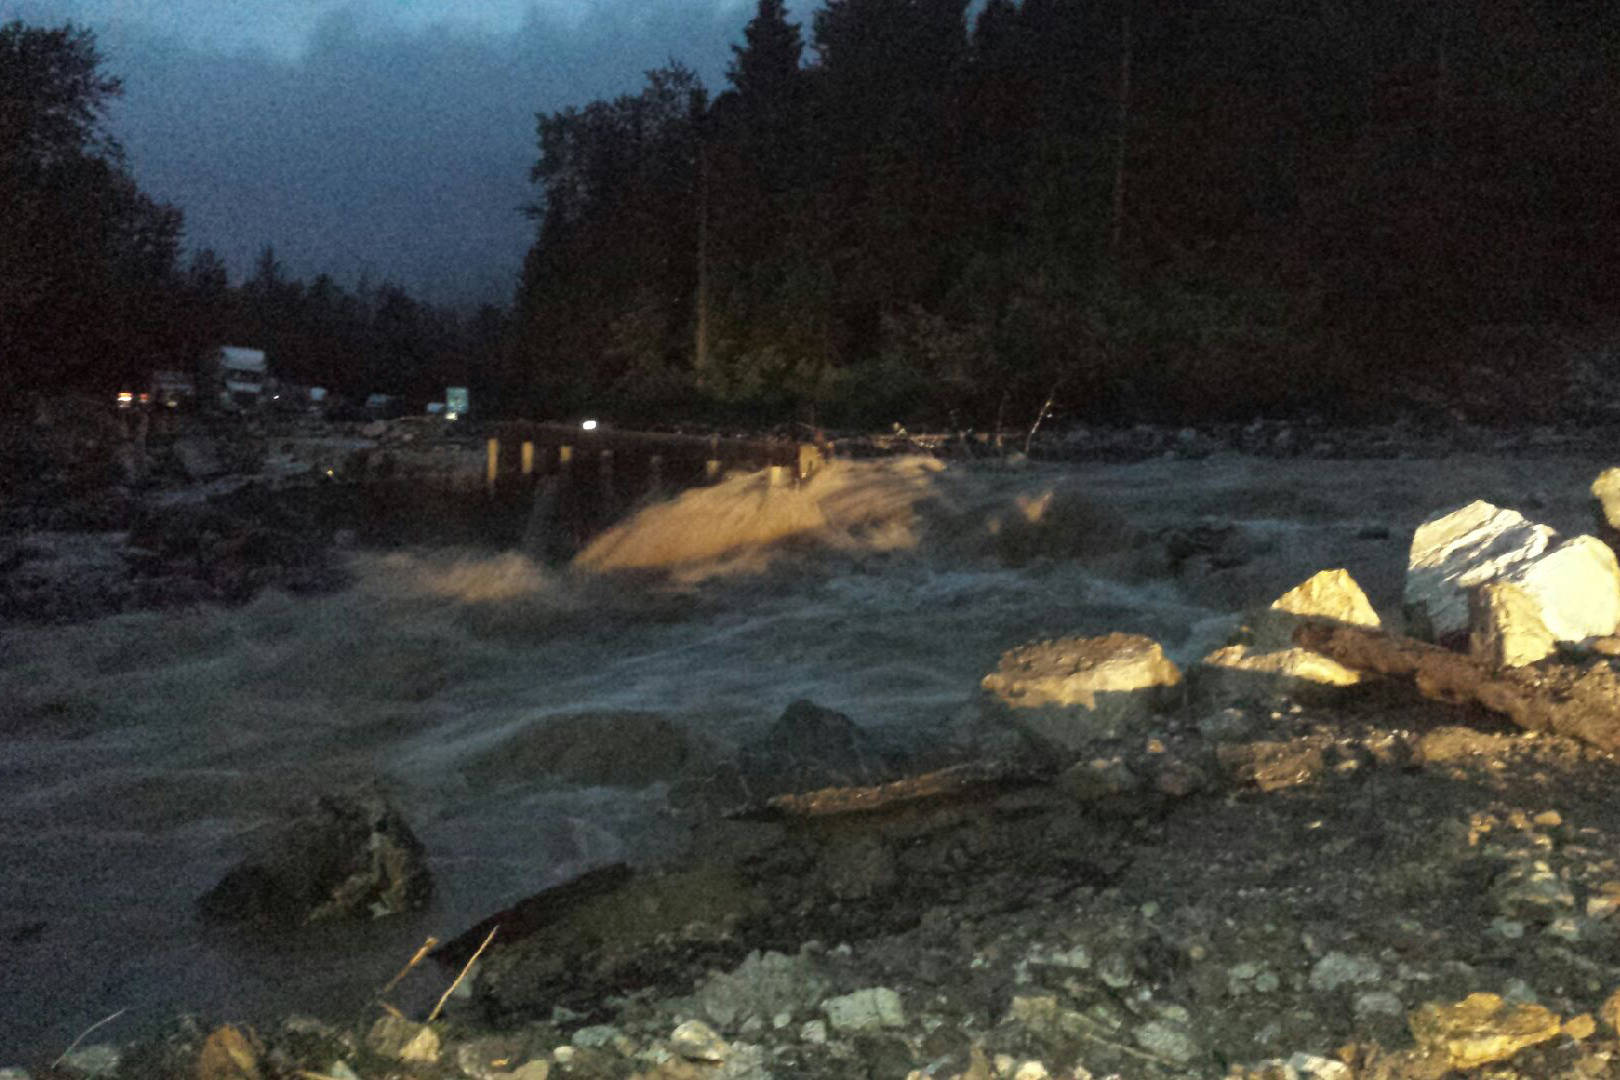 UPDATE: Trans-Canada Highway open from Revelstoke to Sicamous after washout